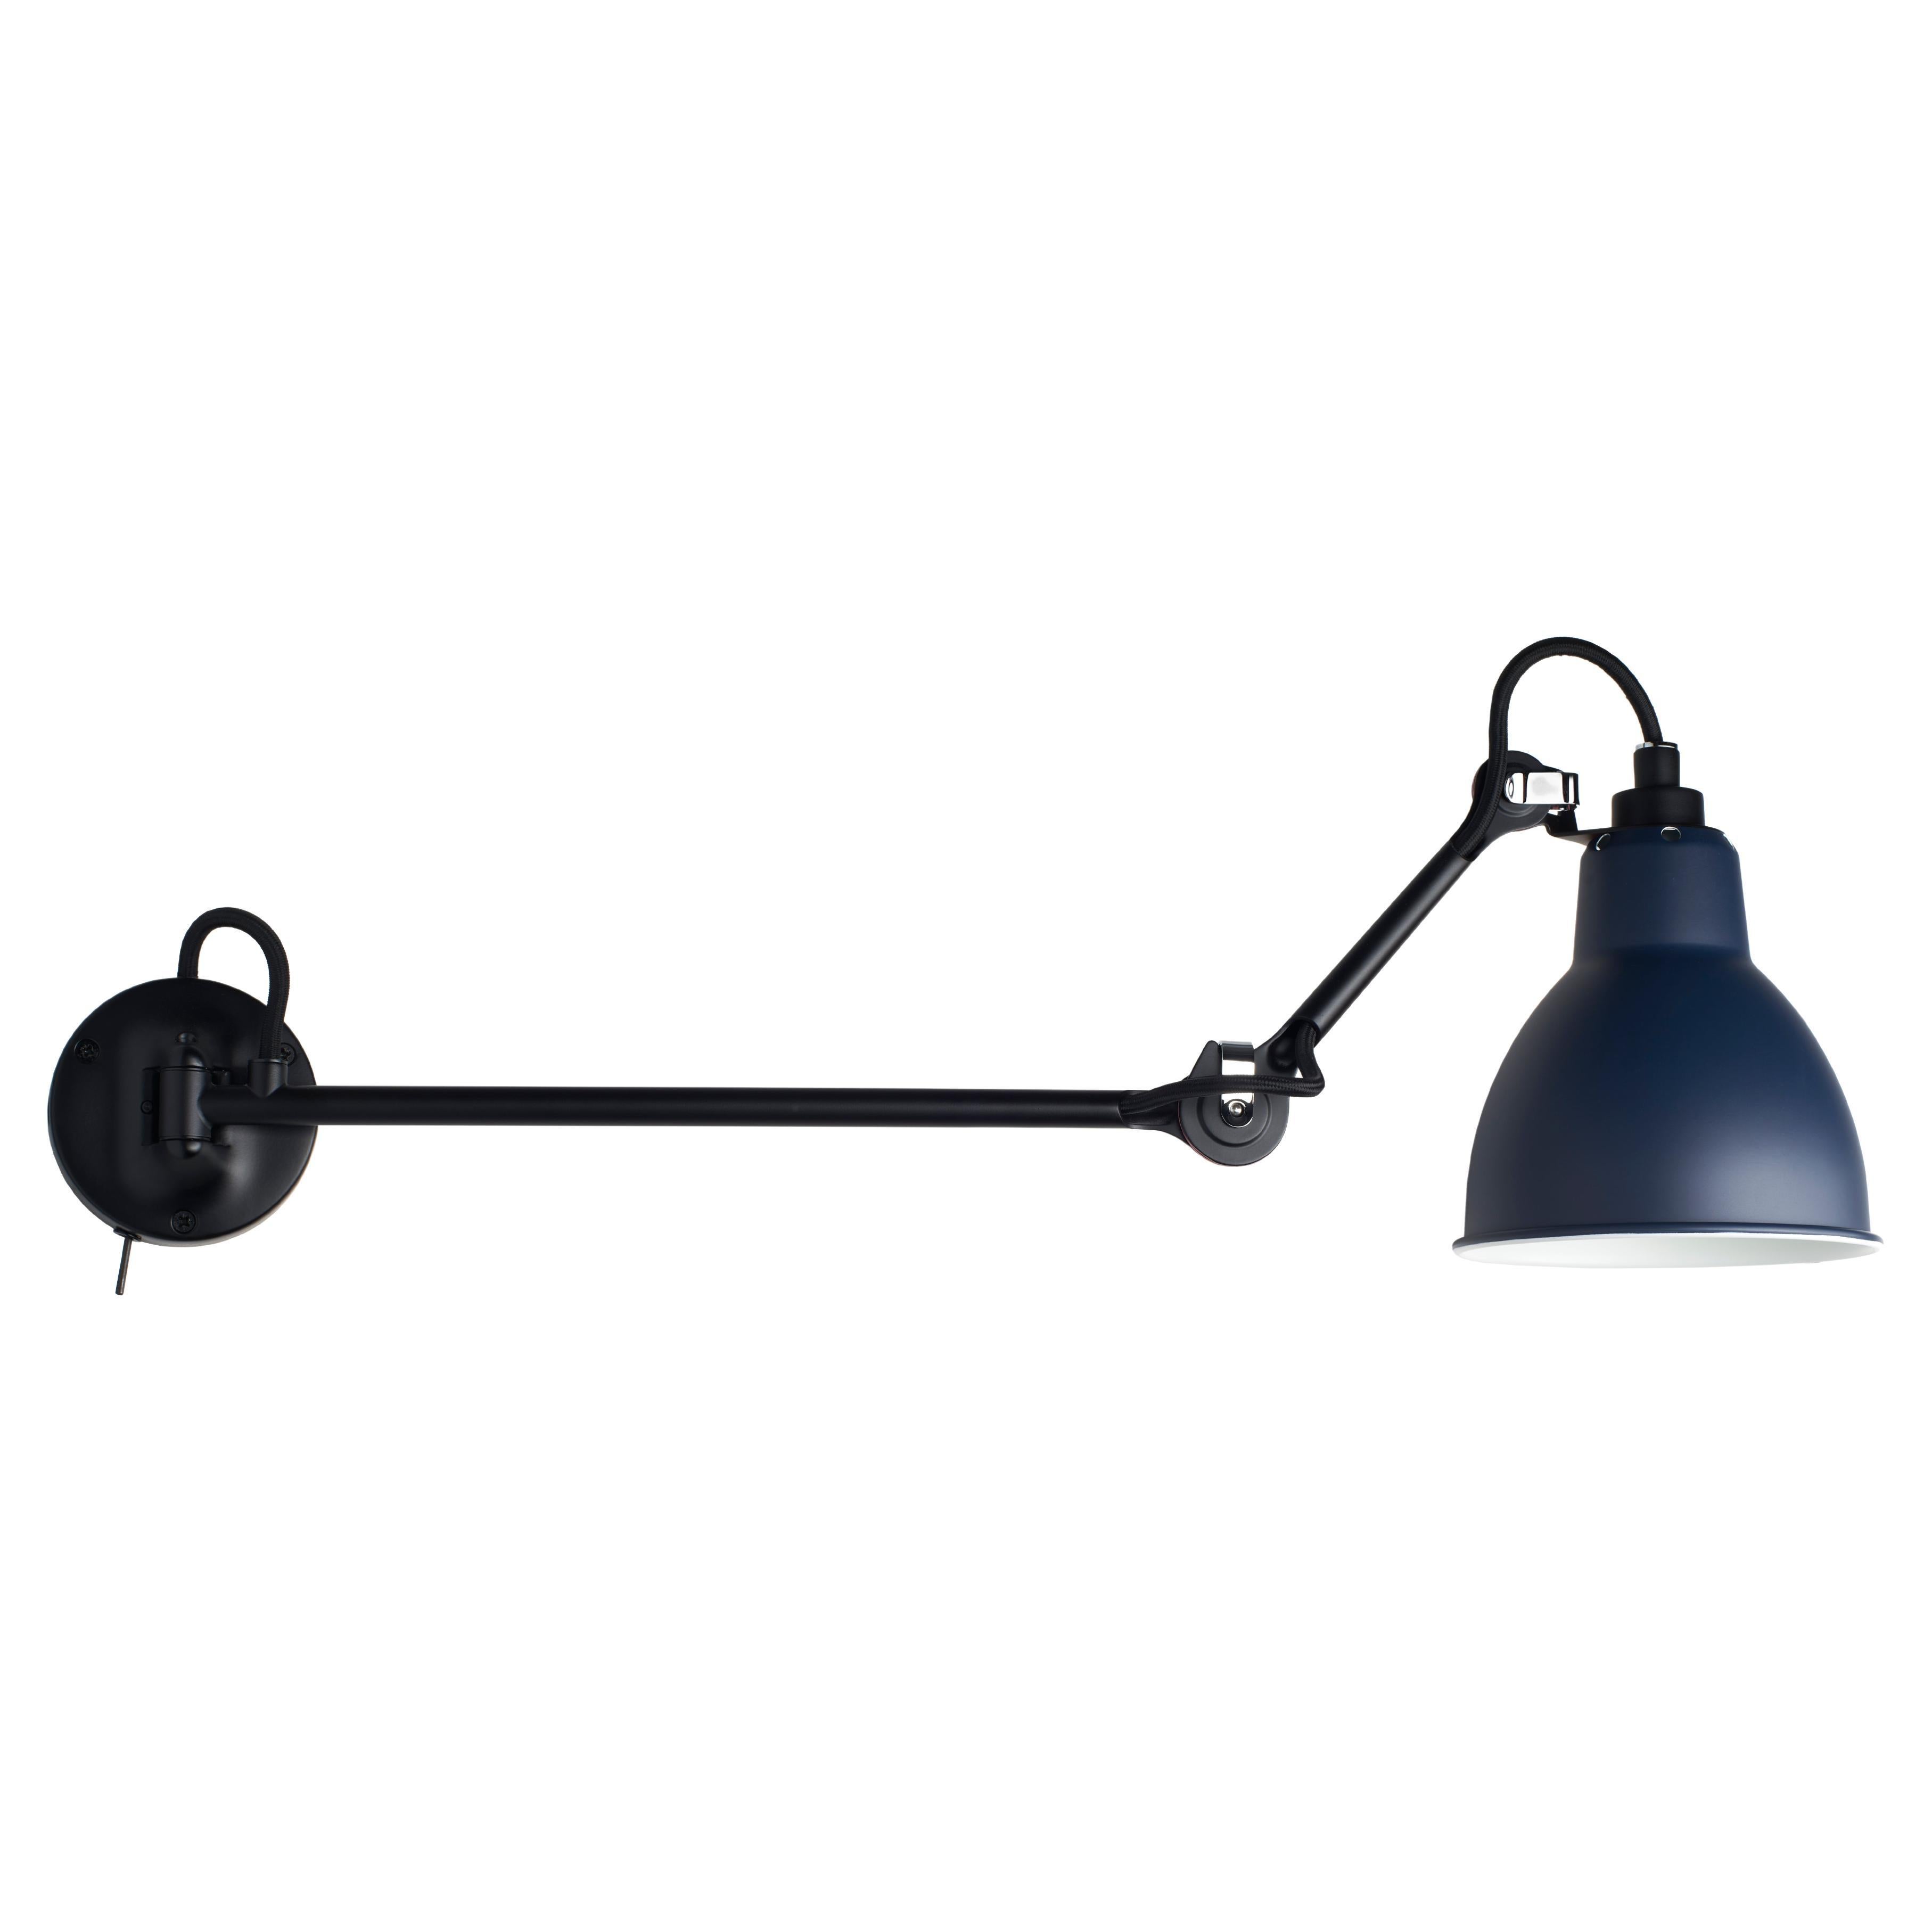 DCW Editions La Lampe Gras N°204 L40 SW Wall Lamp in Black Arm and Blue Shade For Sale